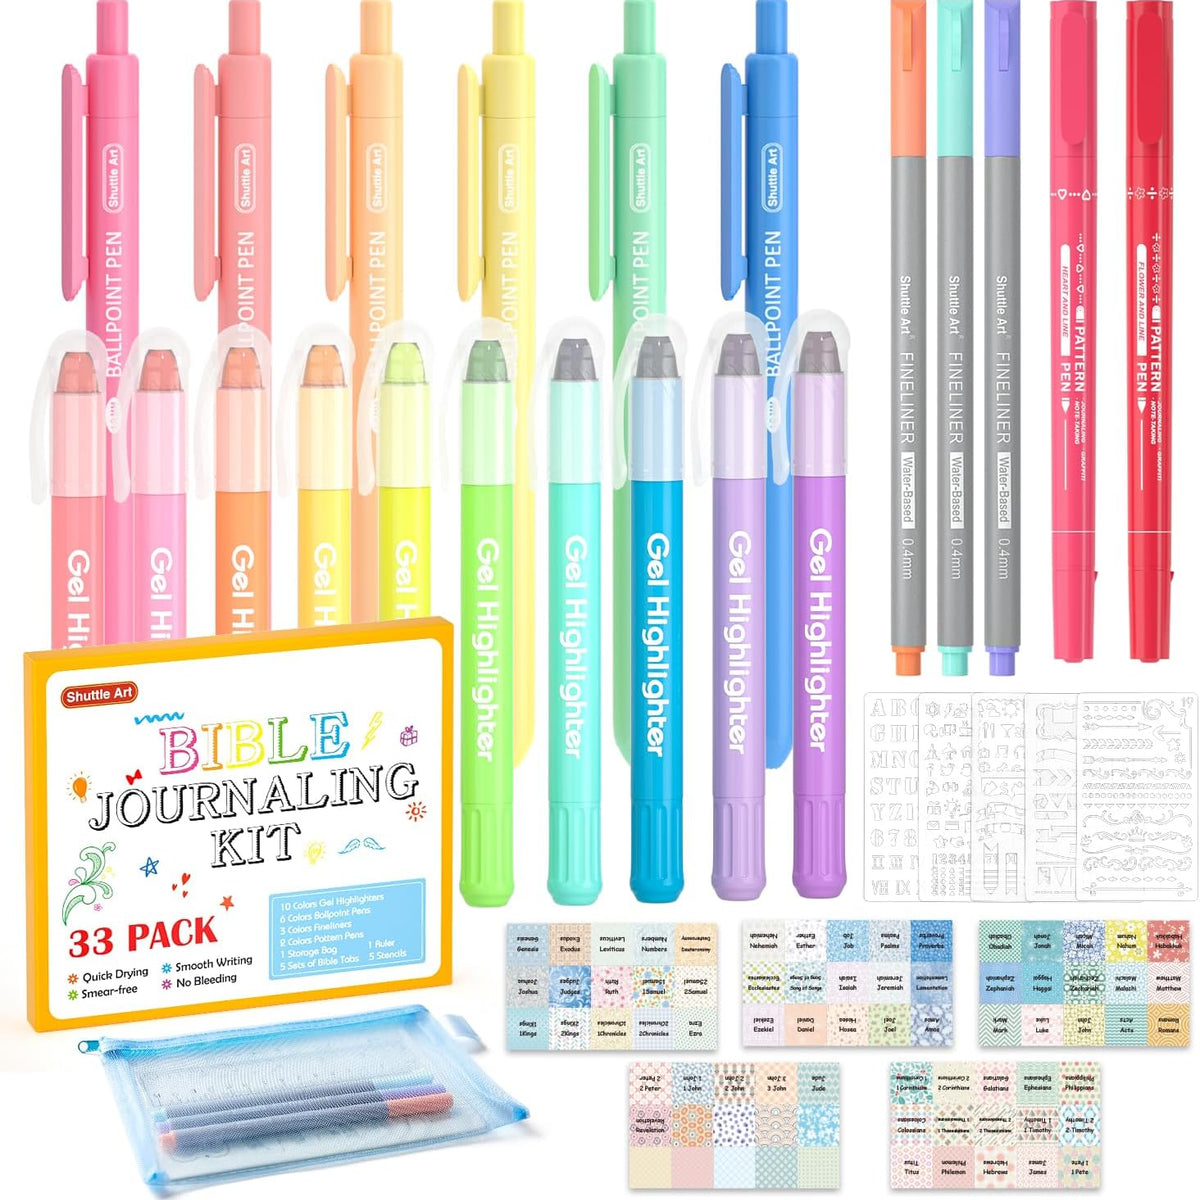 Faber-Castell Bible Journaling Kit - Includes Die Cuts, Stickers, Gelatos,  Pens, and Stencils - Multicolor Art & Craft Kit for Adult Bible Journaling  in the Craft Supplies department at